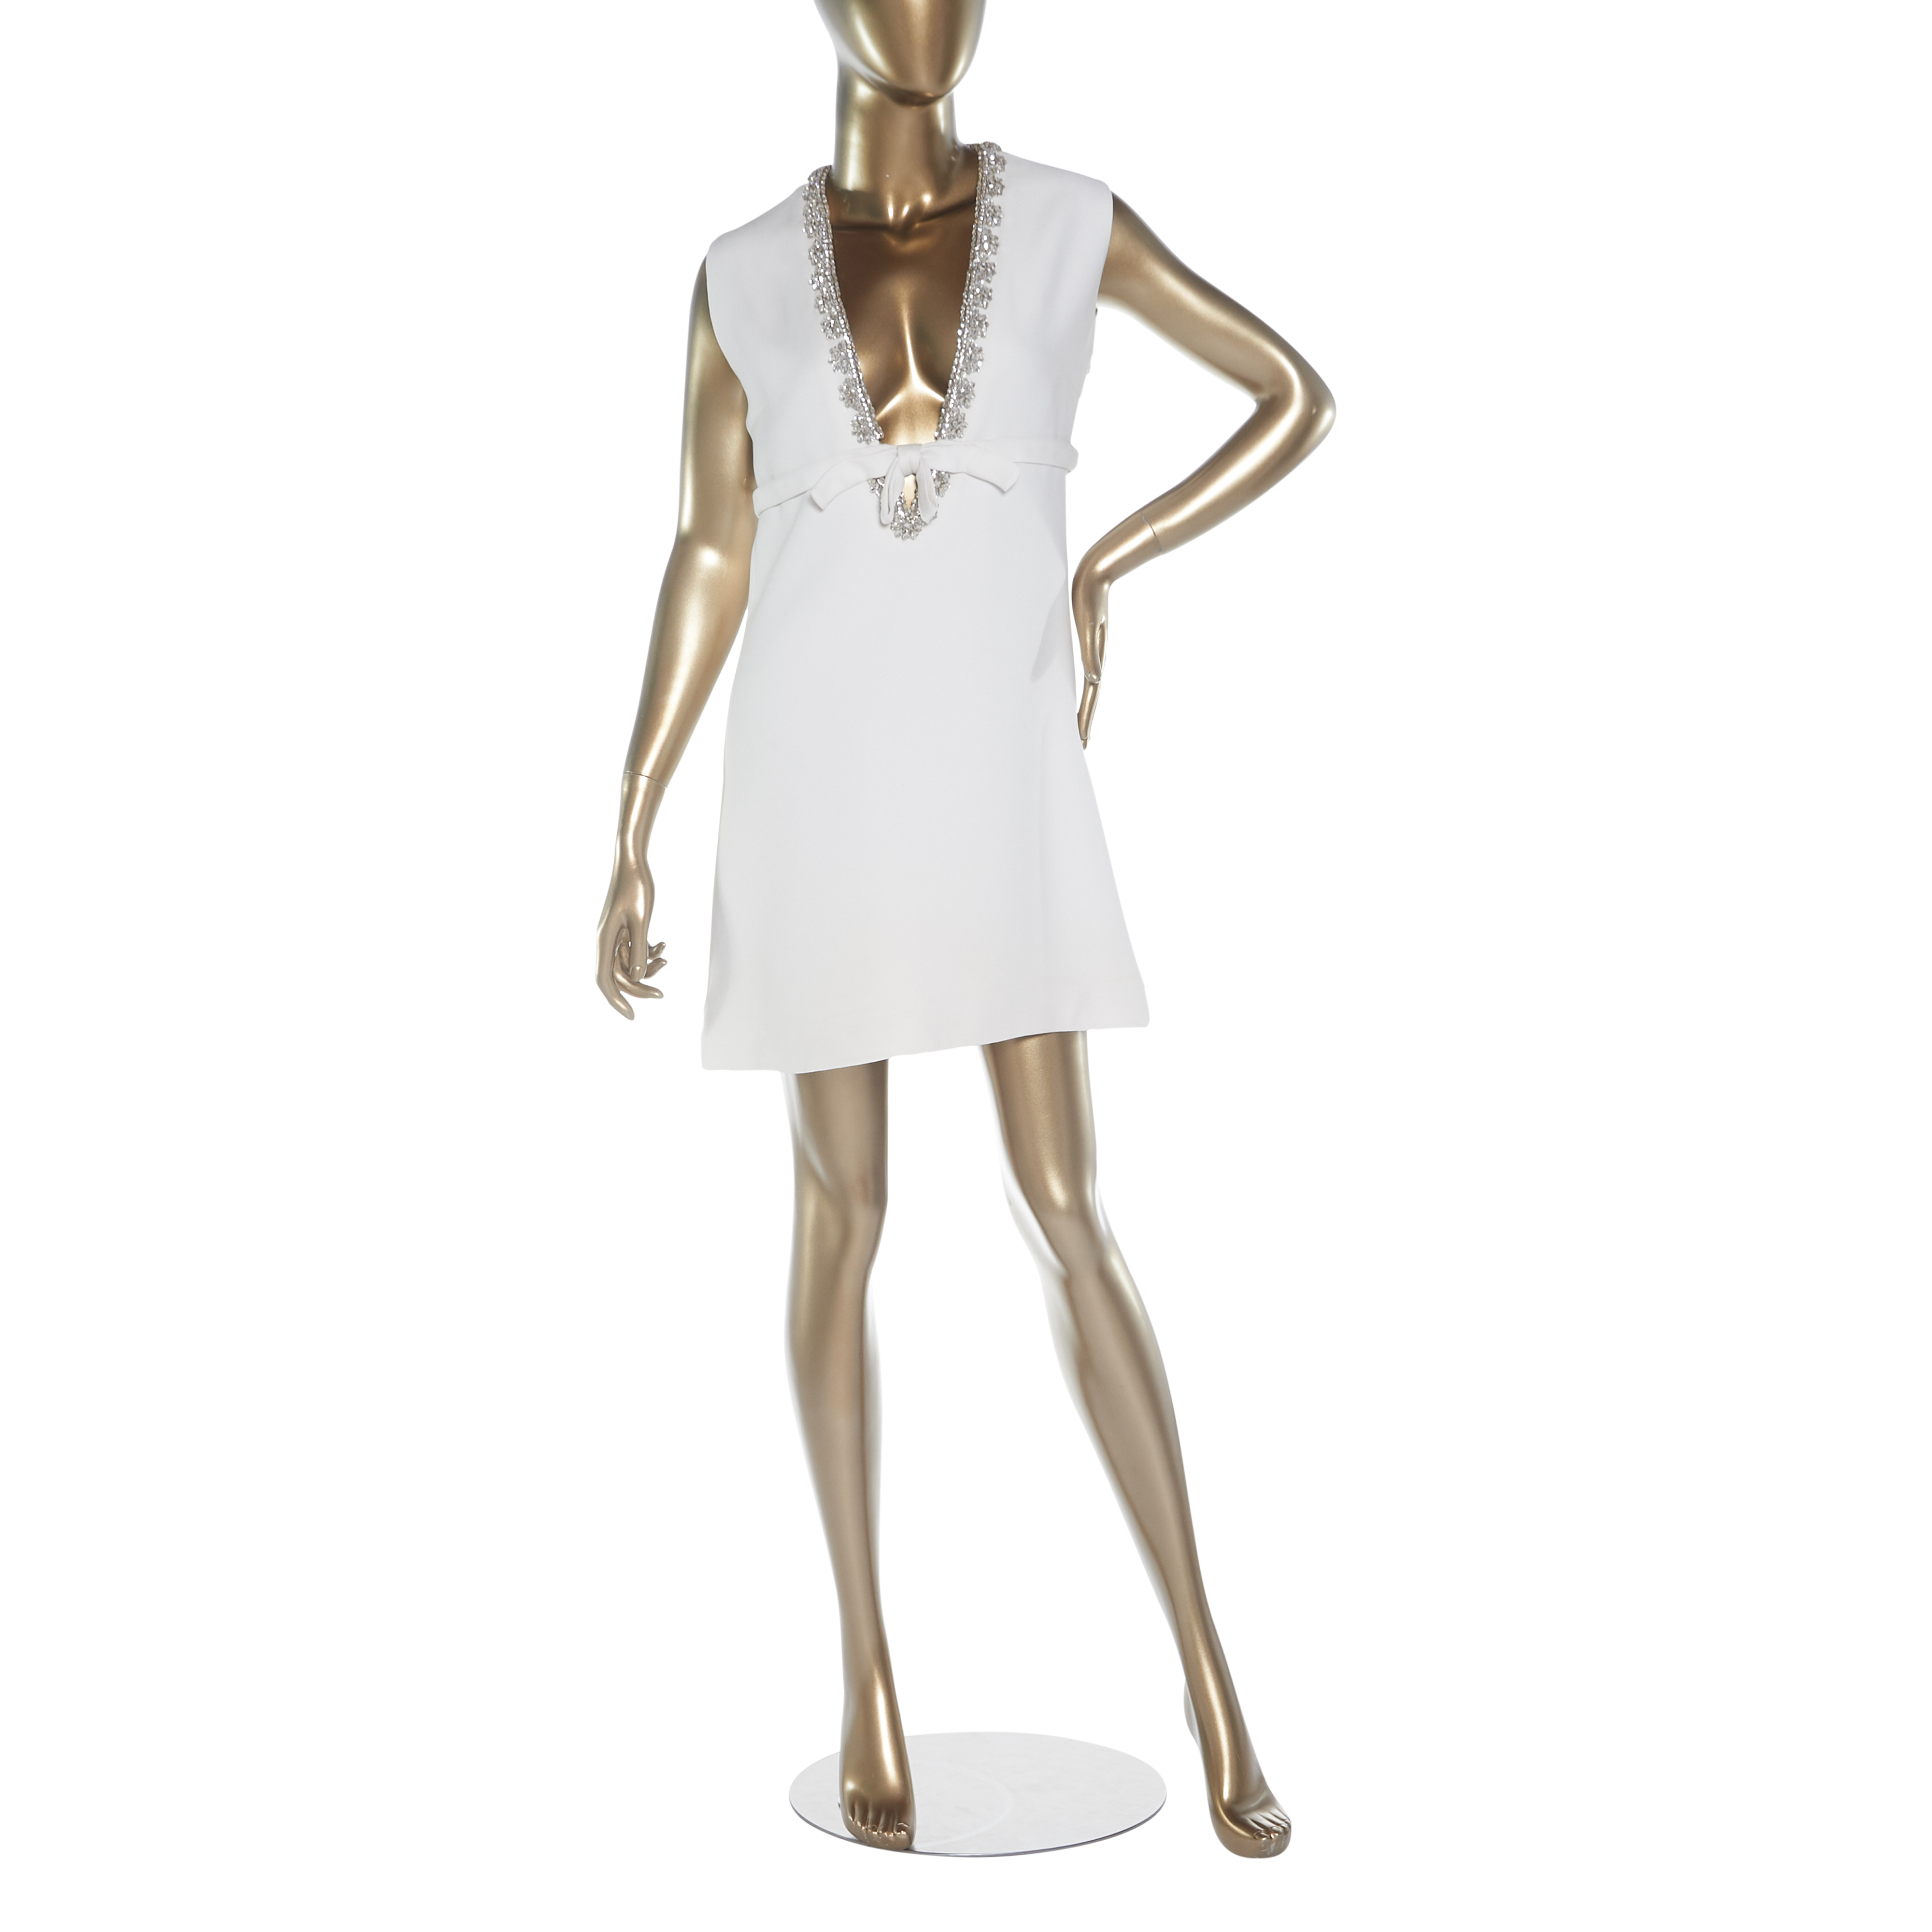 Miu Miu Embellished and Bow Accented Dress - Janet Mandell